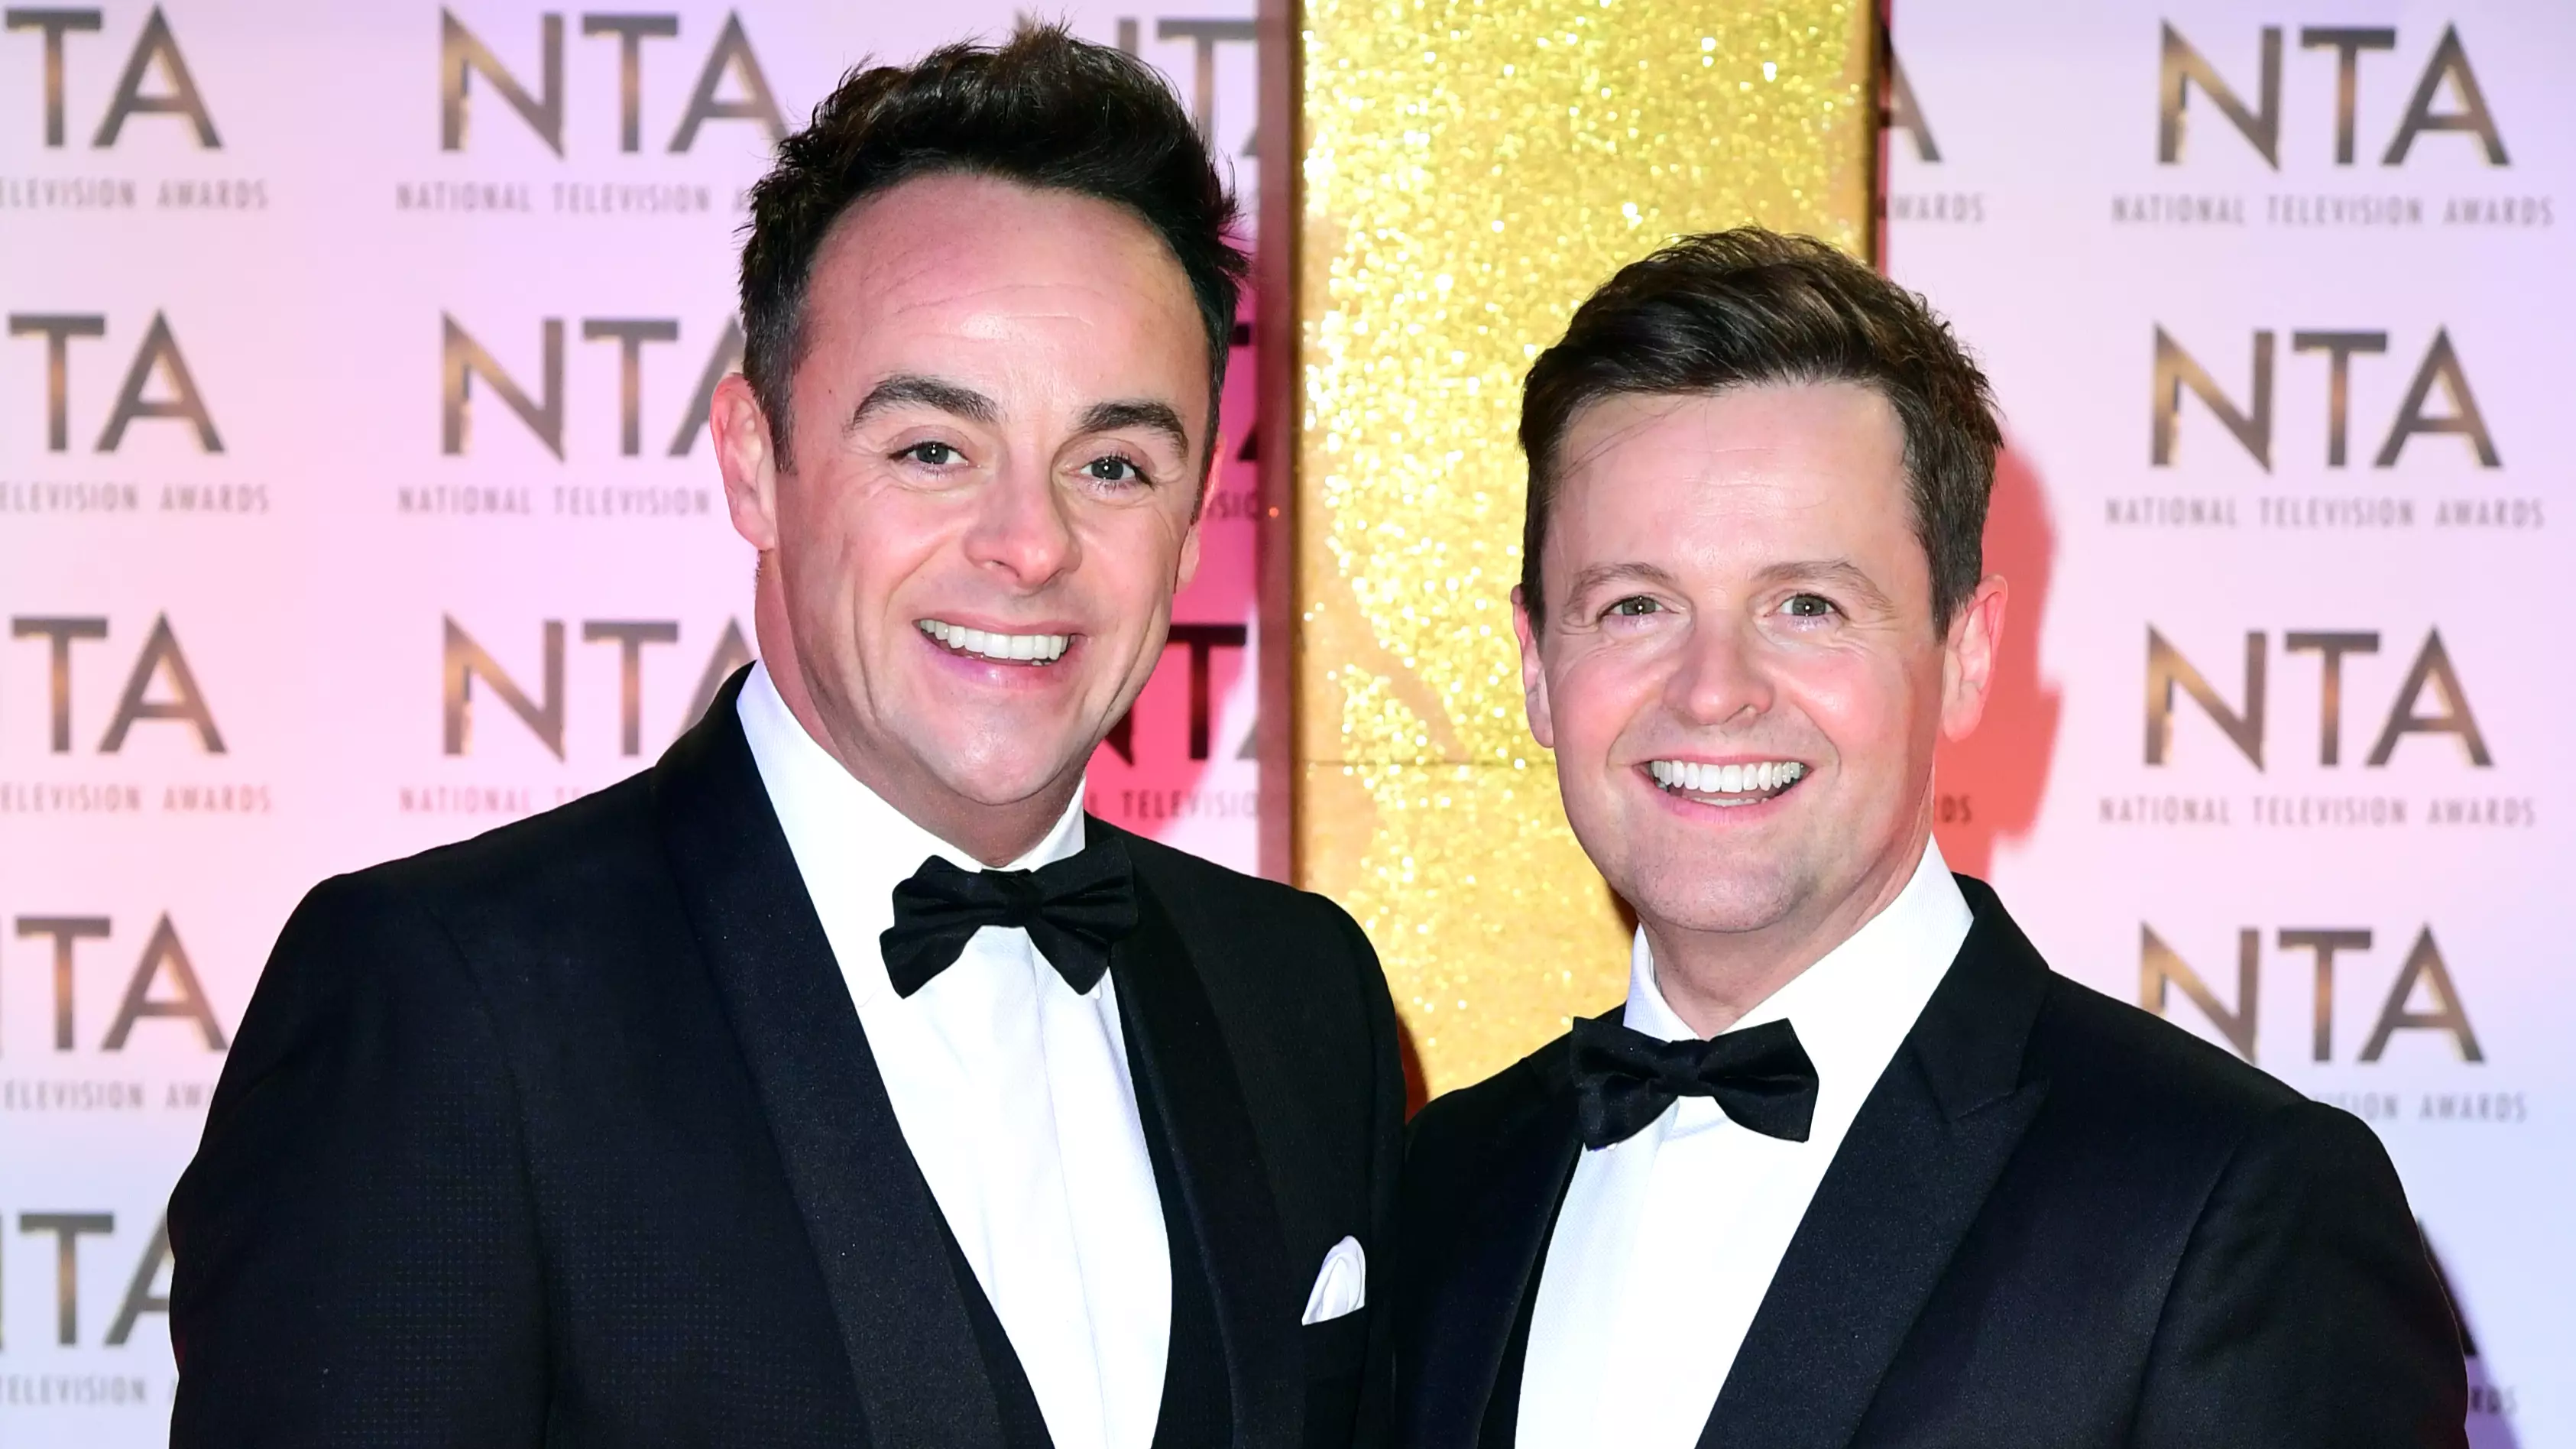 Ant And Dec Win Best Presenter At NTA For 19th Year Running